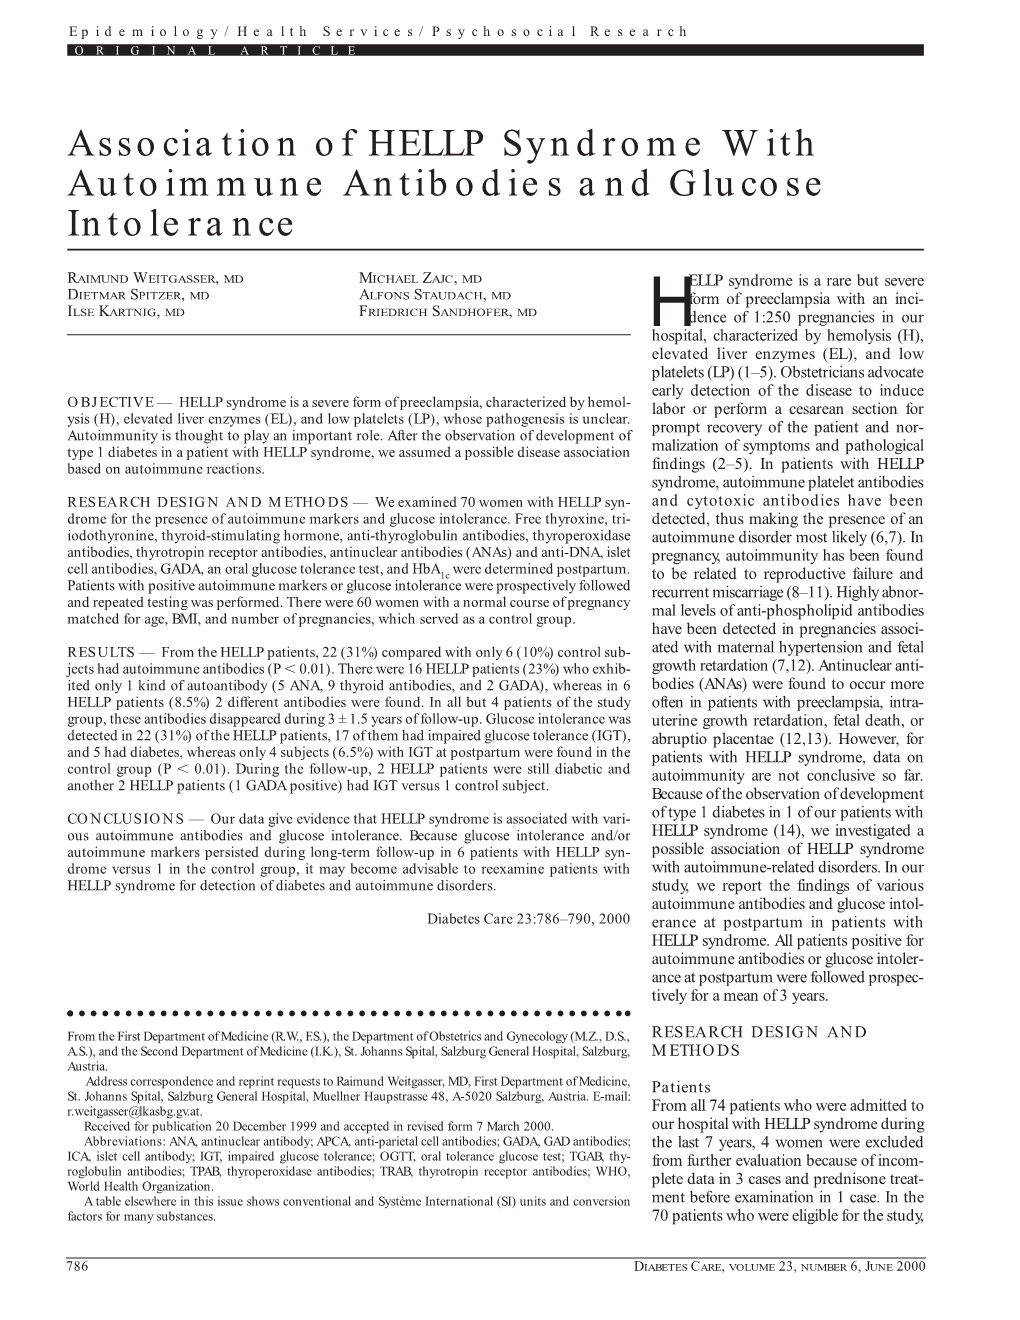 Association of HELLP Syndrome with Autoimmune Antibodies and Glucose Intolerance